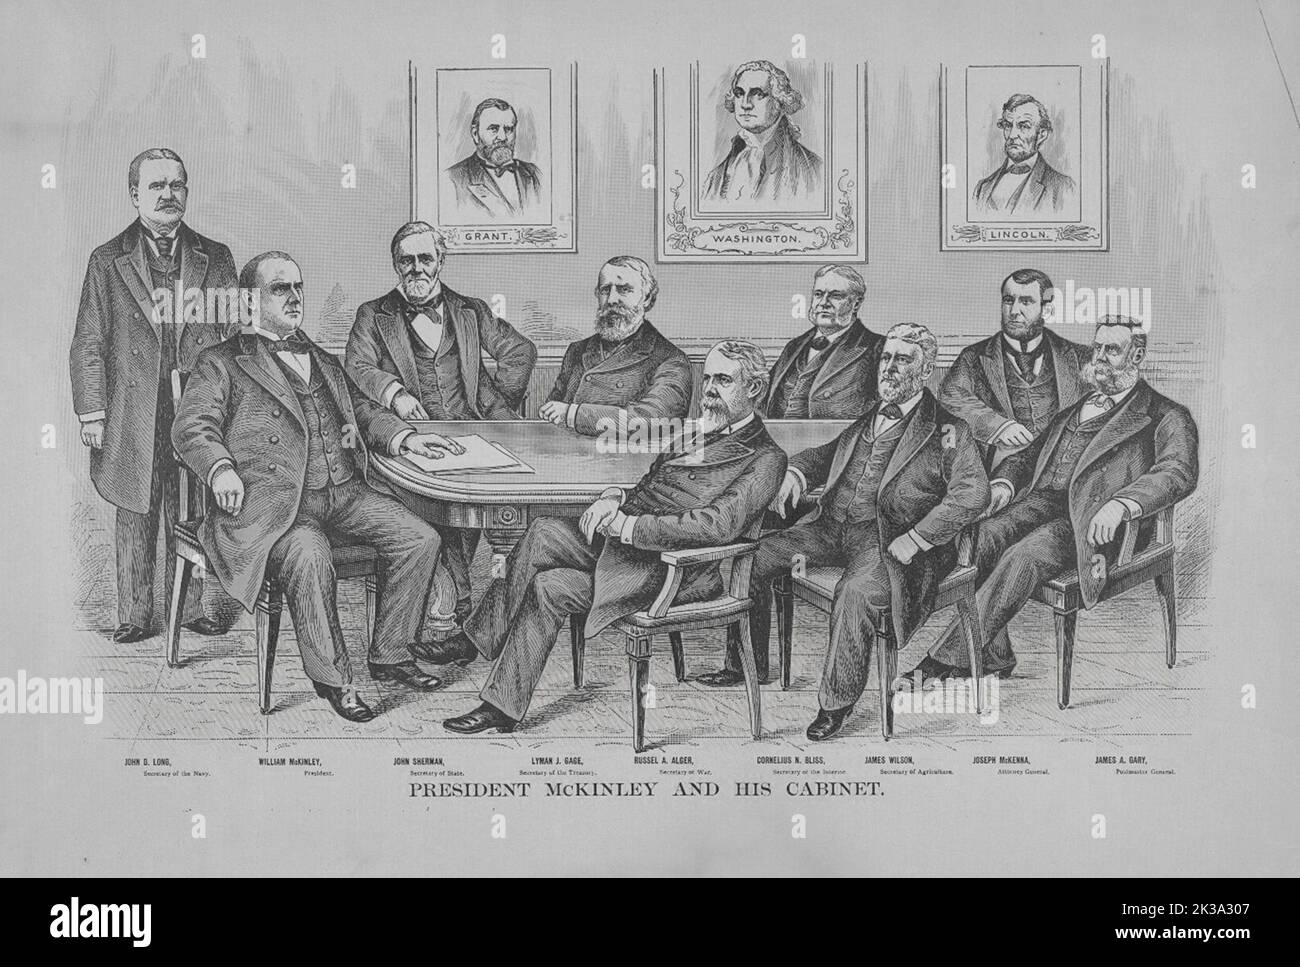 President McKinley and His Cabinet, which was comprised of John Long, John Sherman, Lyman Gage, Russel Alger, Cornelius Bliss, James Wilson, Joseph KcKenna and James Gary Stock Photo